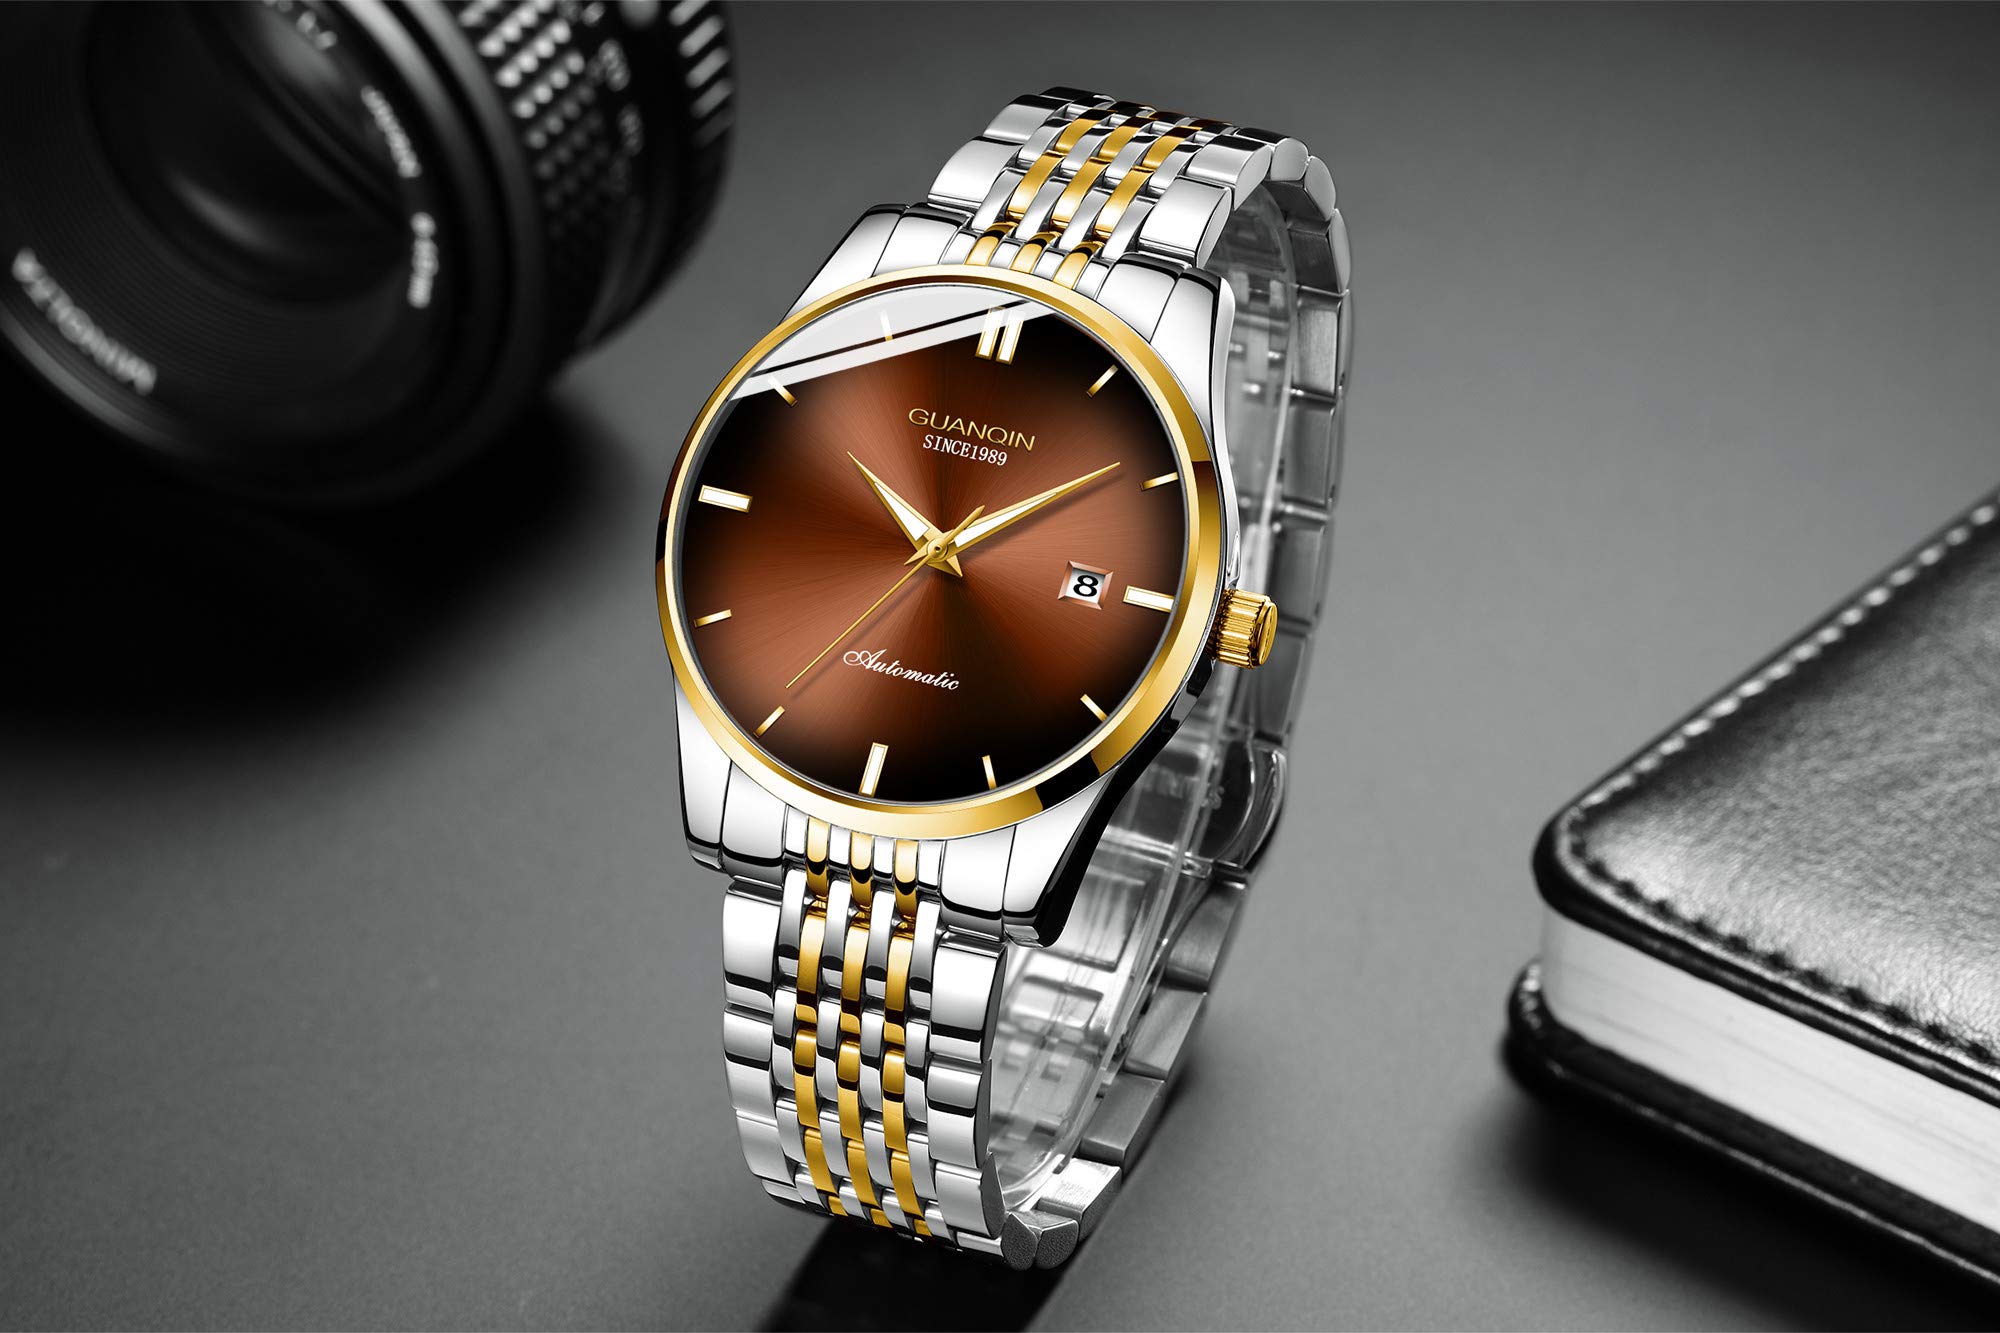 GUANQIN Men Date Luminous Analog Japanese Automatic Self Winding Mechanical Wrist Watch with Stainless Steel Bracelet